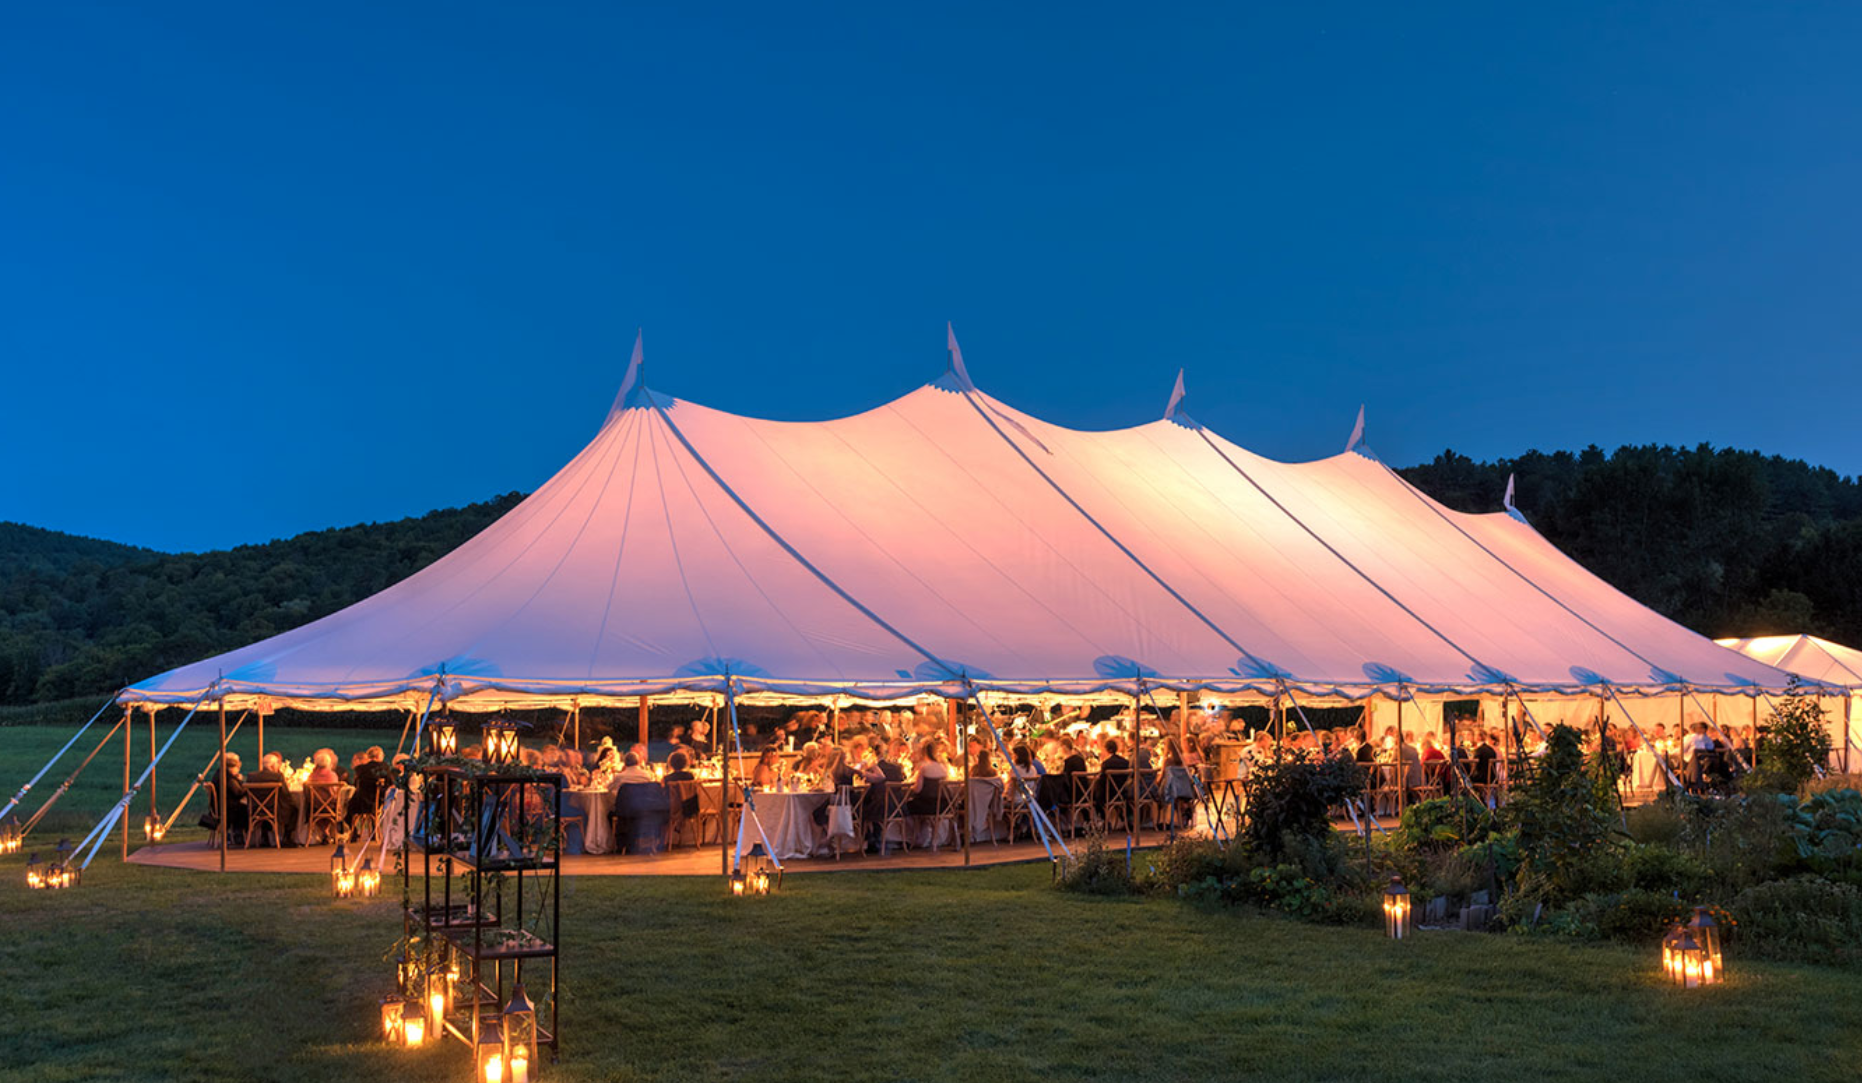 The sail cloth marquee showing our wedding packages